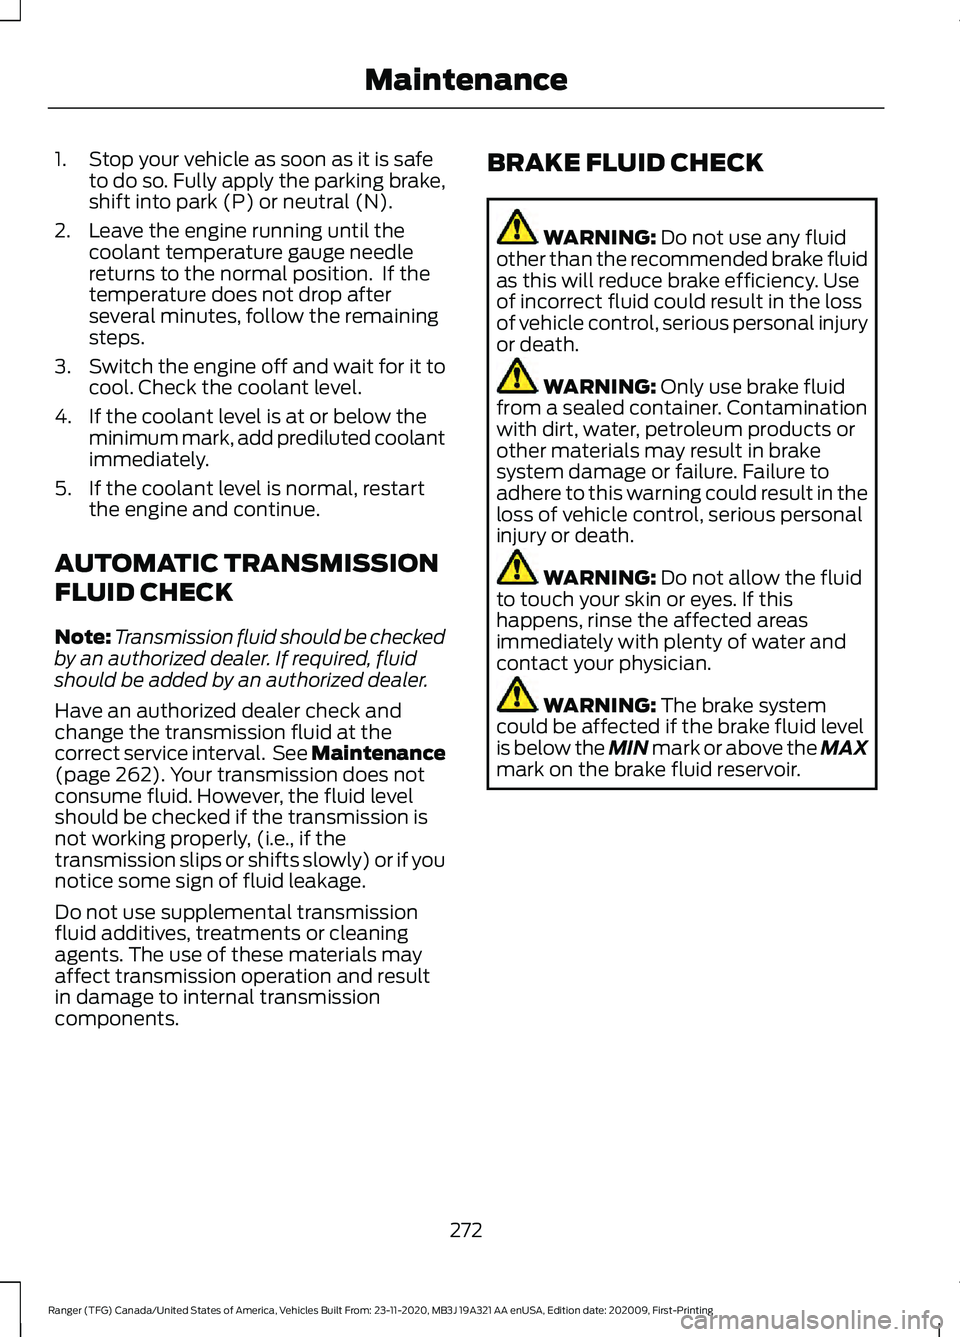 FORD RANGER 2021  Owners Manual 1. Stop your vehicle as soon as it is safe
to do so. Fully apply the parking brake,
shift into park (P) or neutral (N).
2. Leave the engine running until the coolant temperature gauge needle
returns t